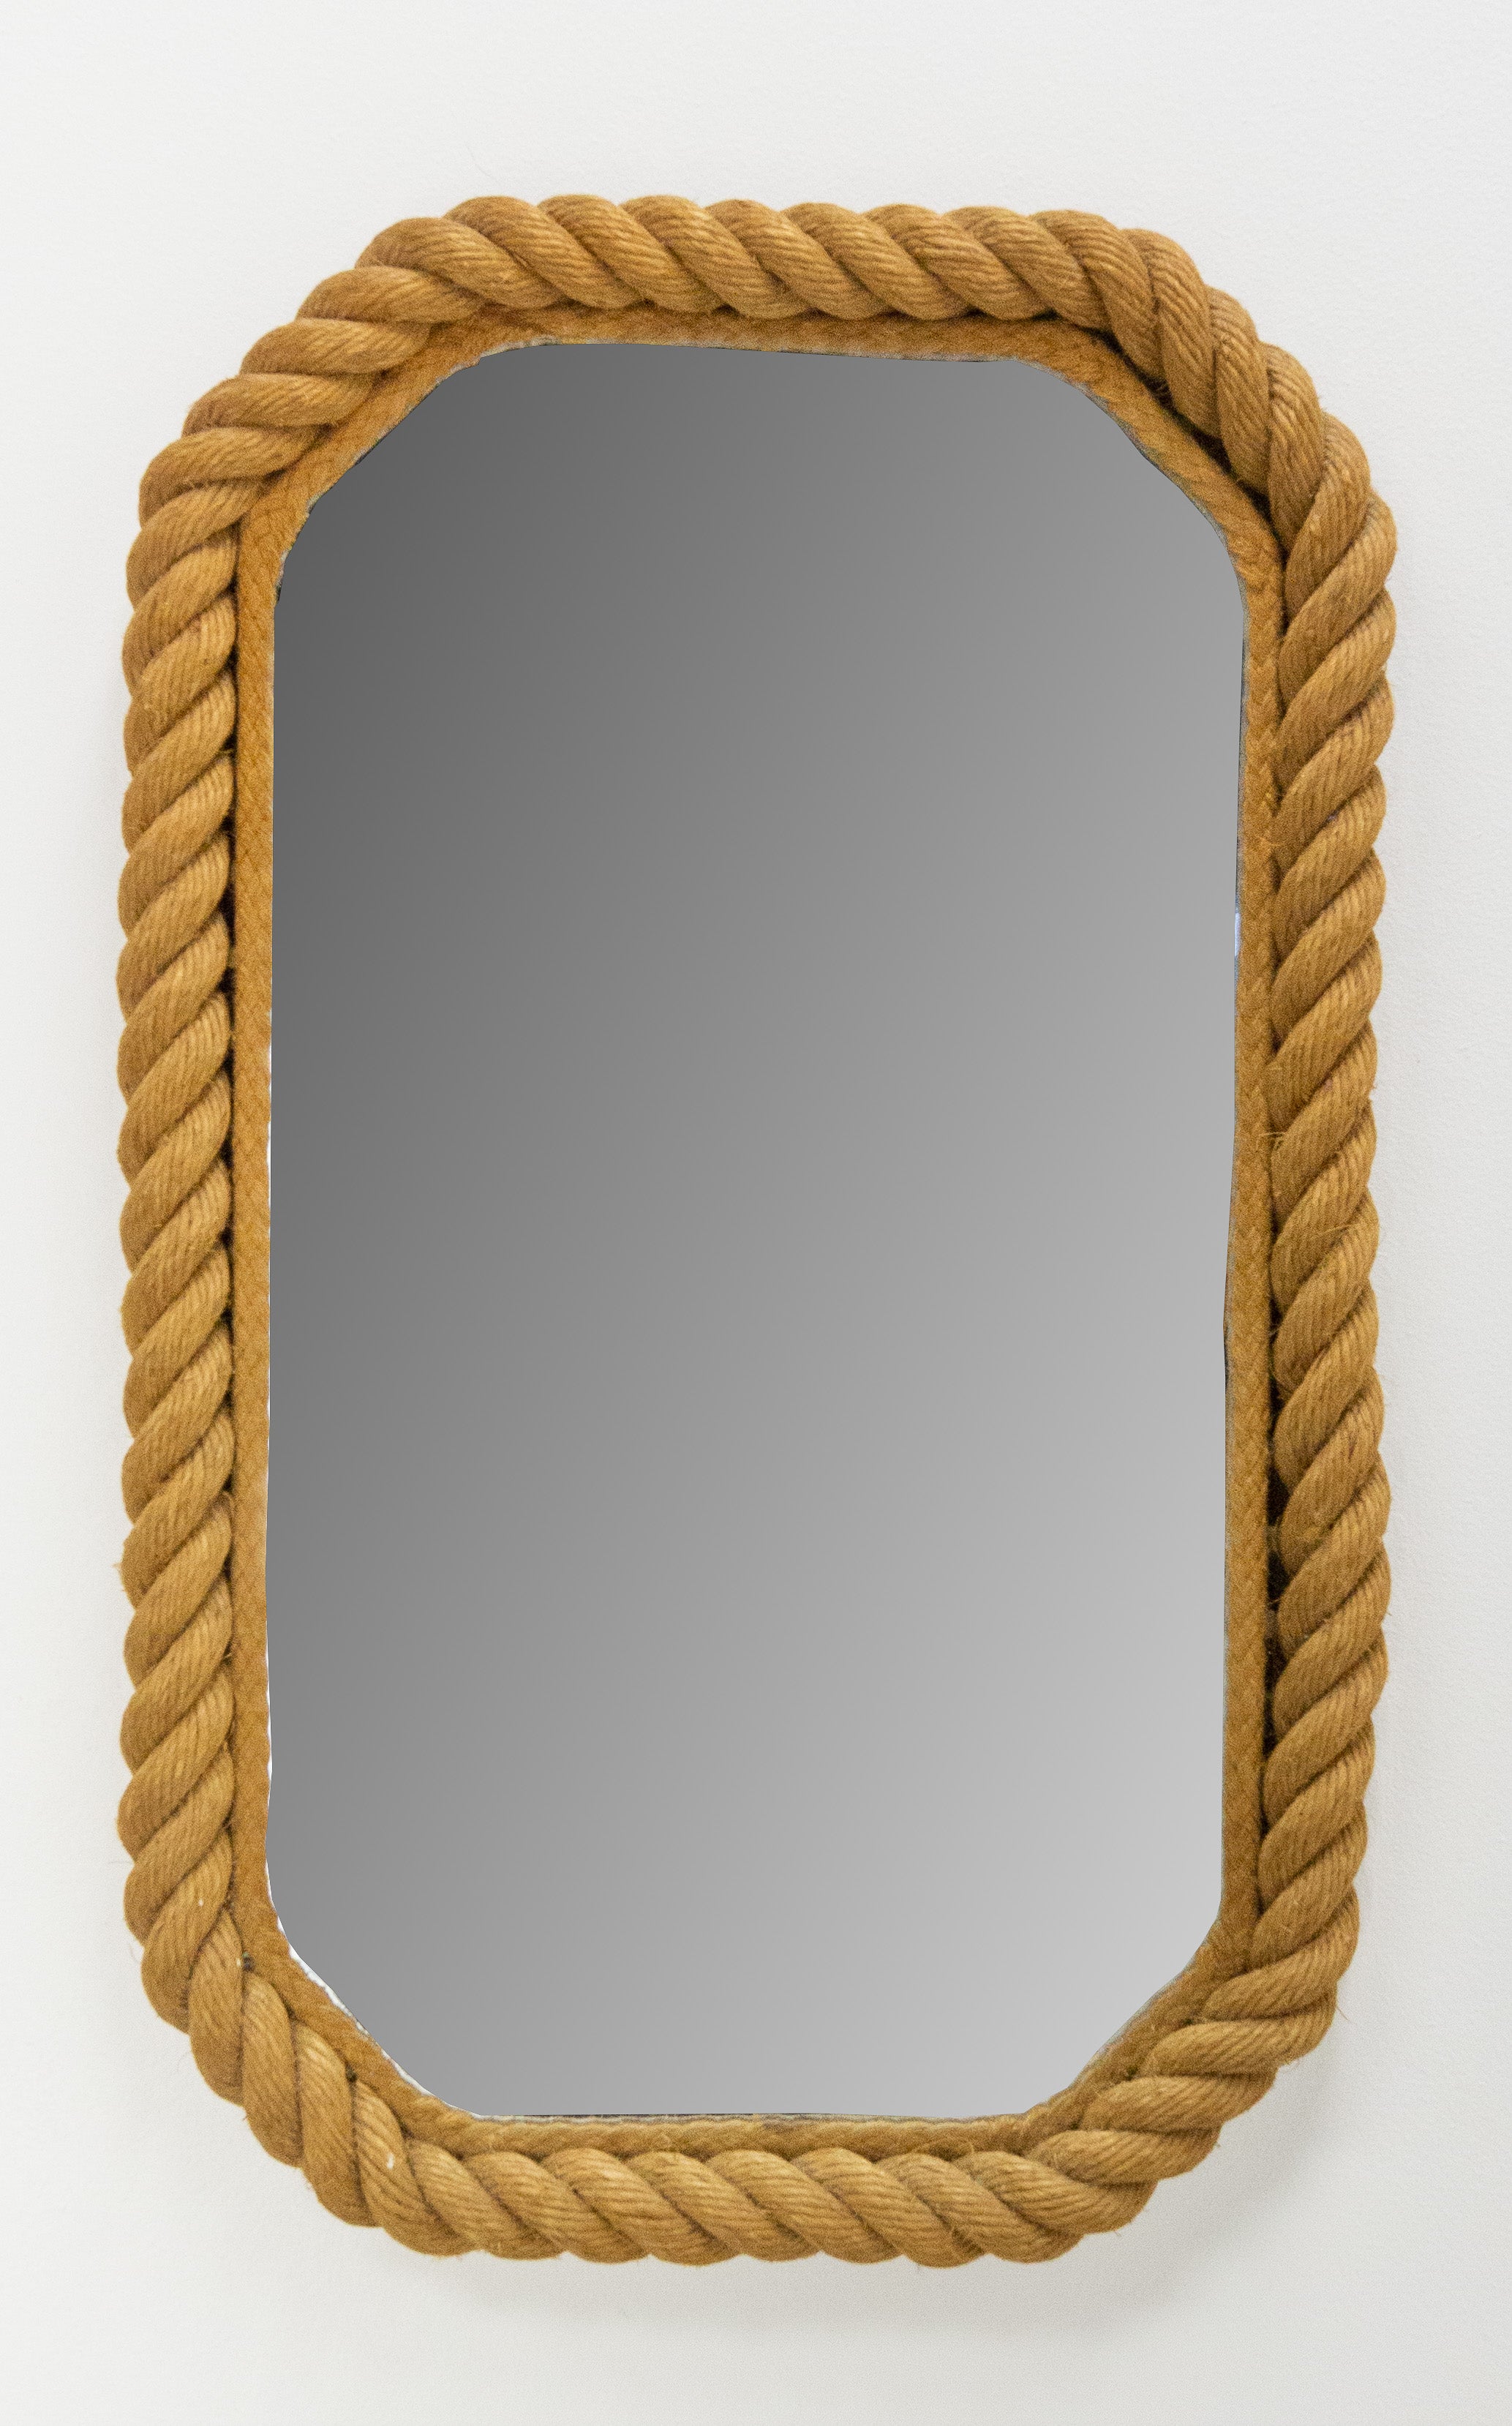 French Rectangular wall mirror from Adrien Audoux and Frida Minet.
This Franco-Swiss couple wanted to make art with everyday objects from simple materials. They were in opposition to Art Deco, which used luxurious materials. Their goal was also to